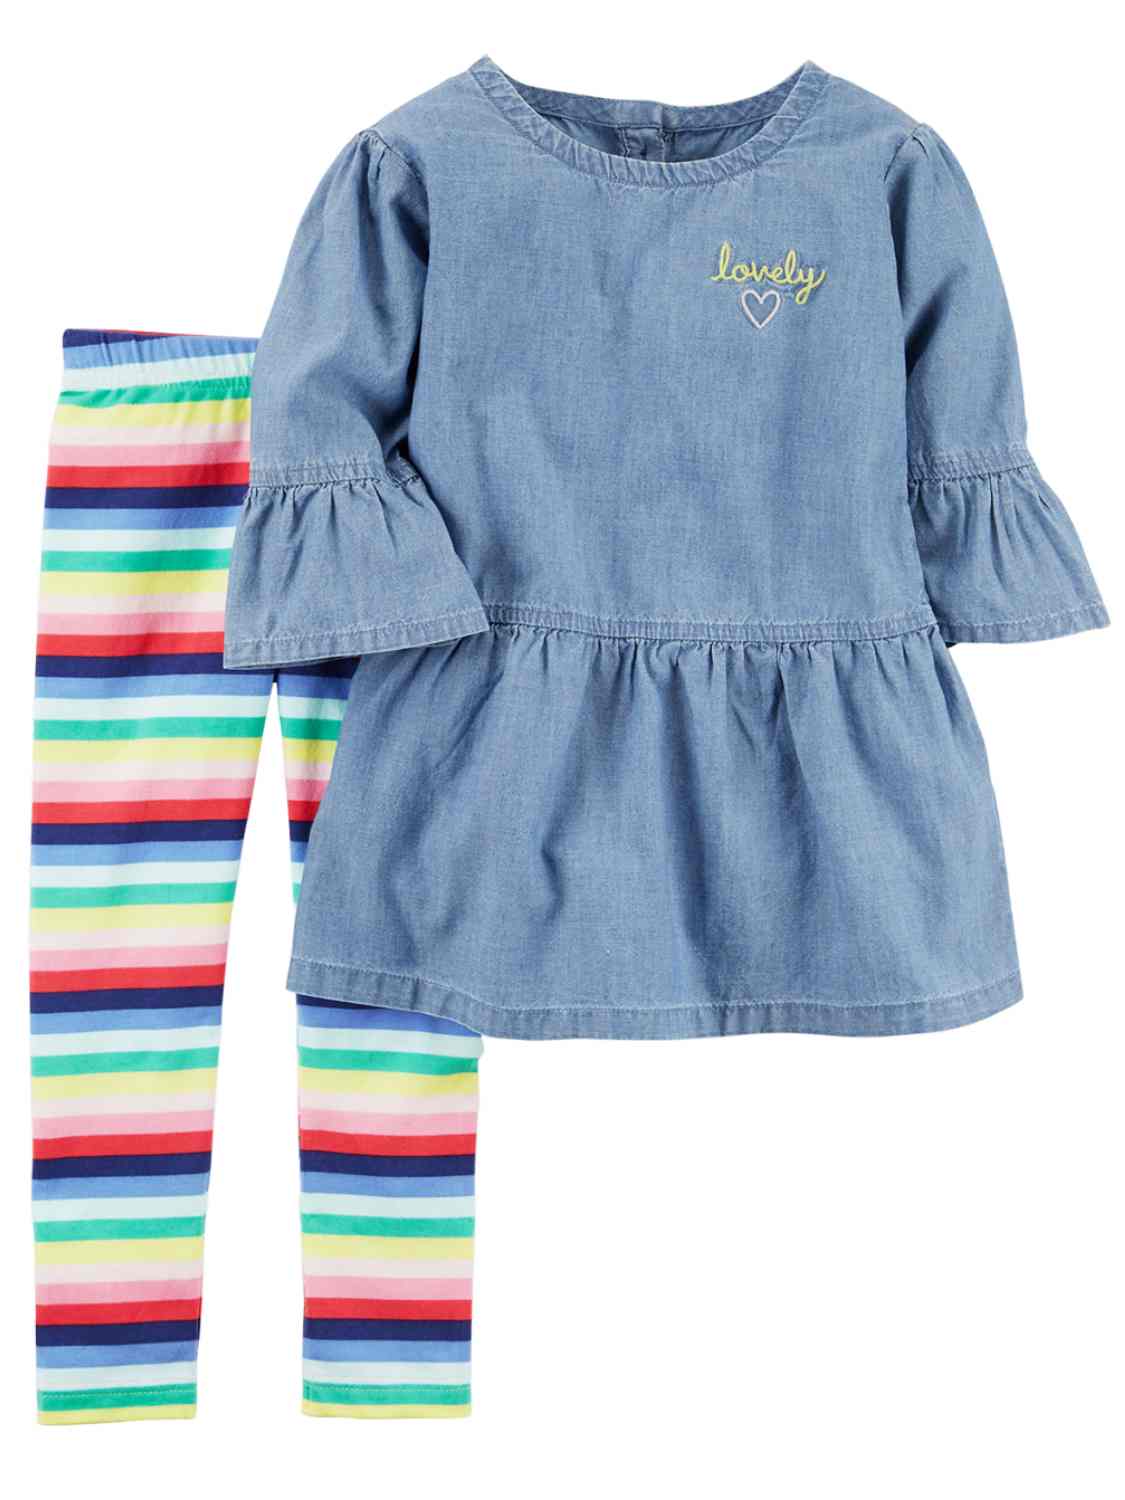 Carter's Carters Little Girls Outfit Blue Chambray Shirt & Rainbow Striped Pants